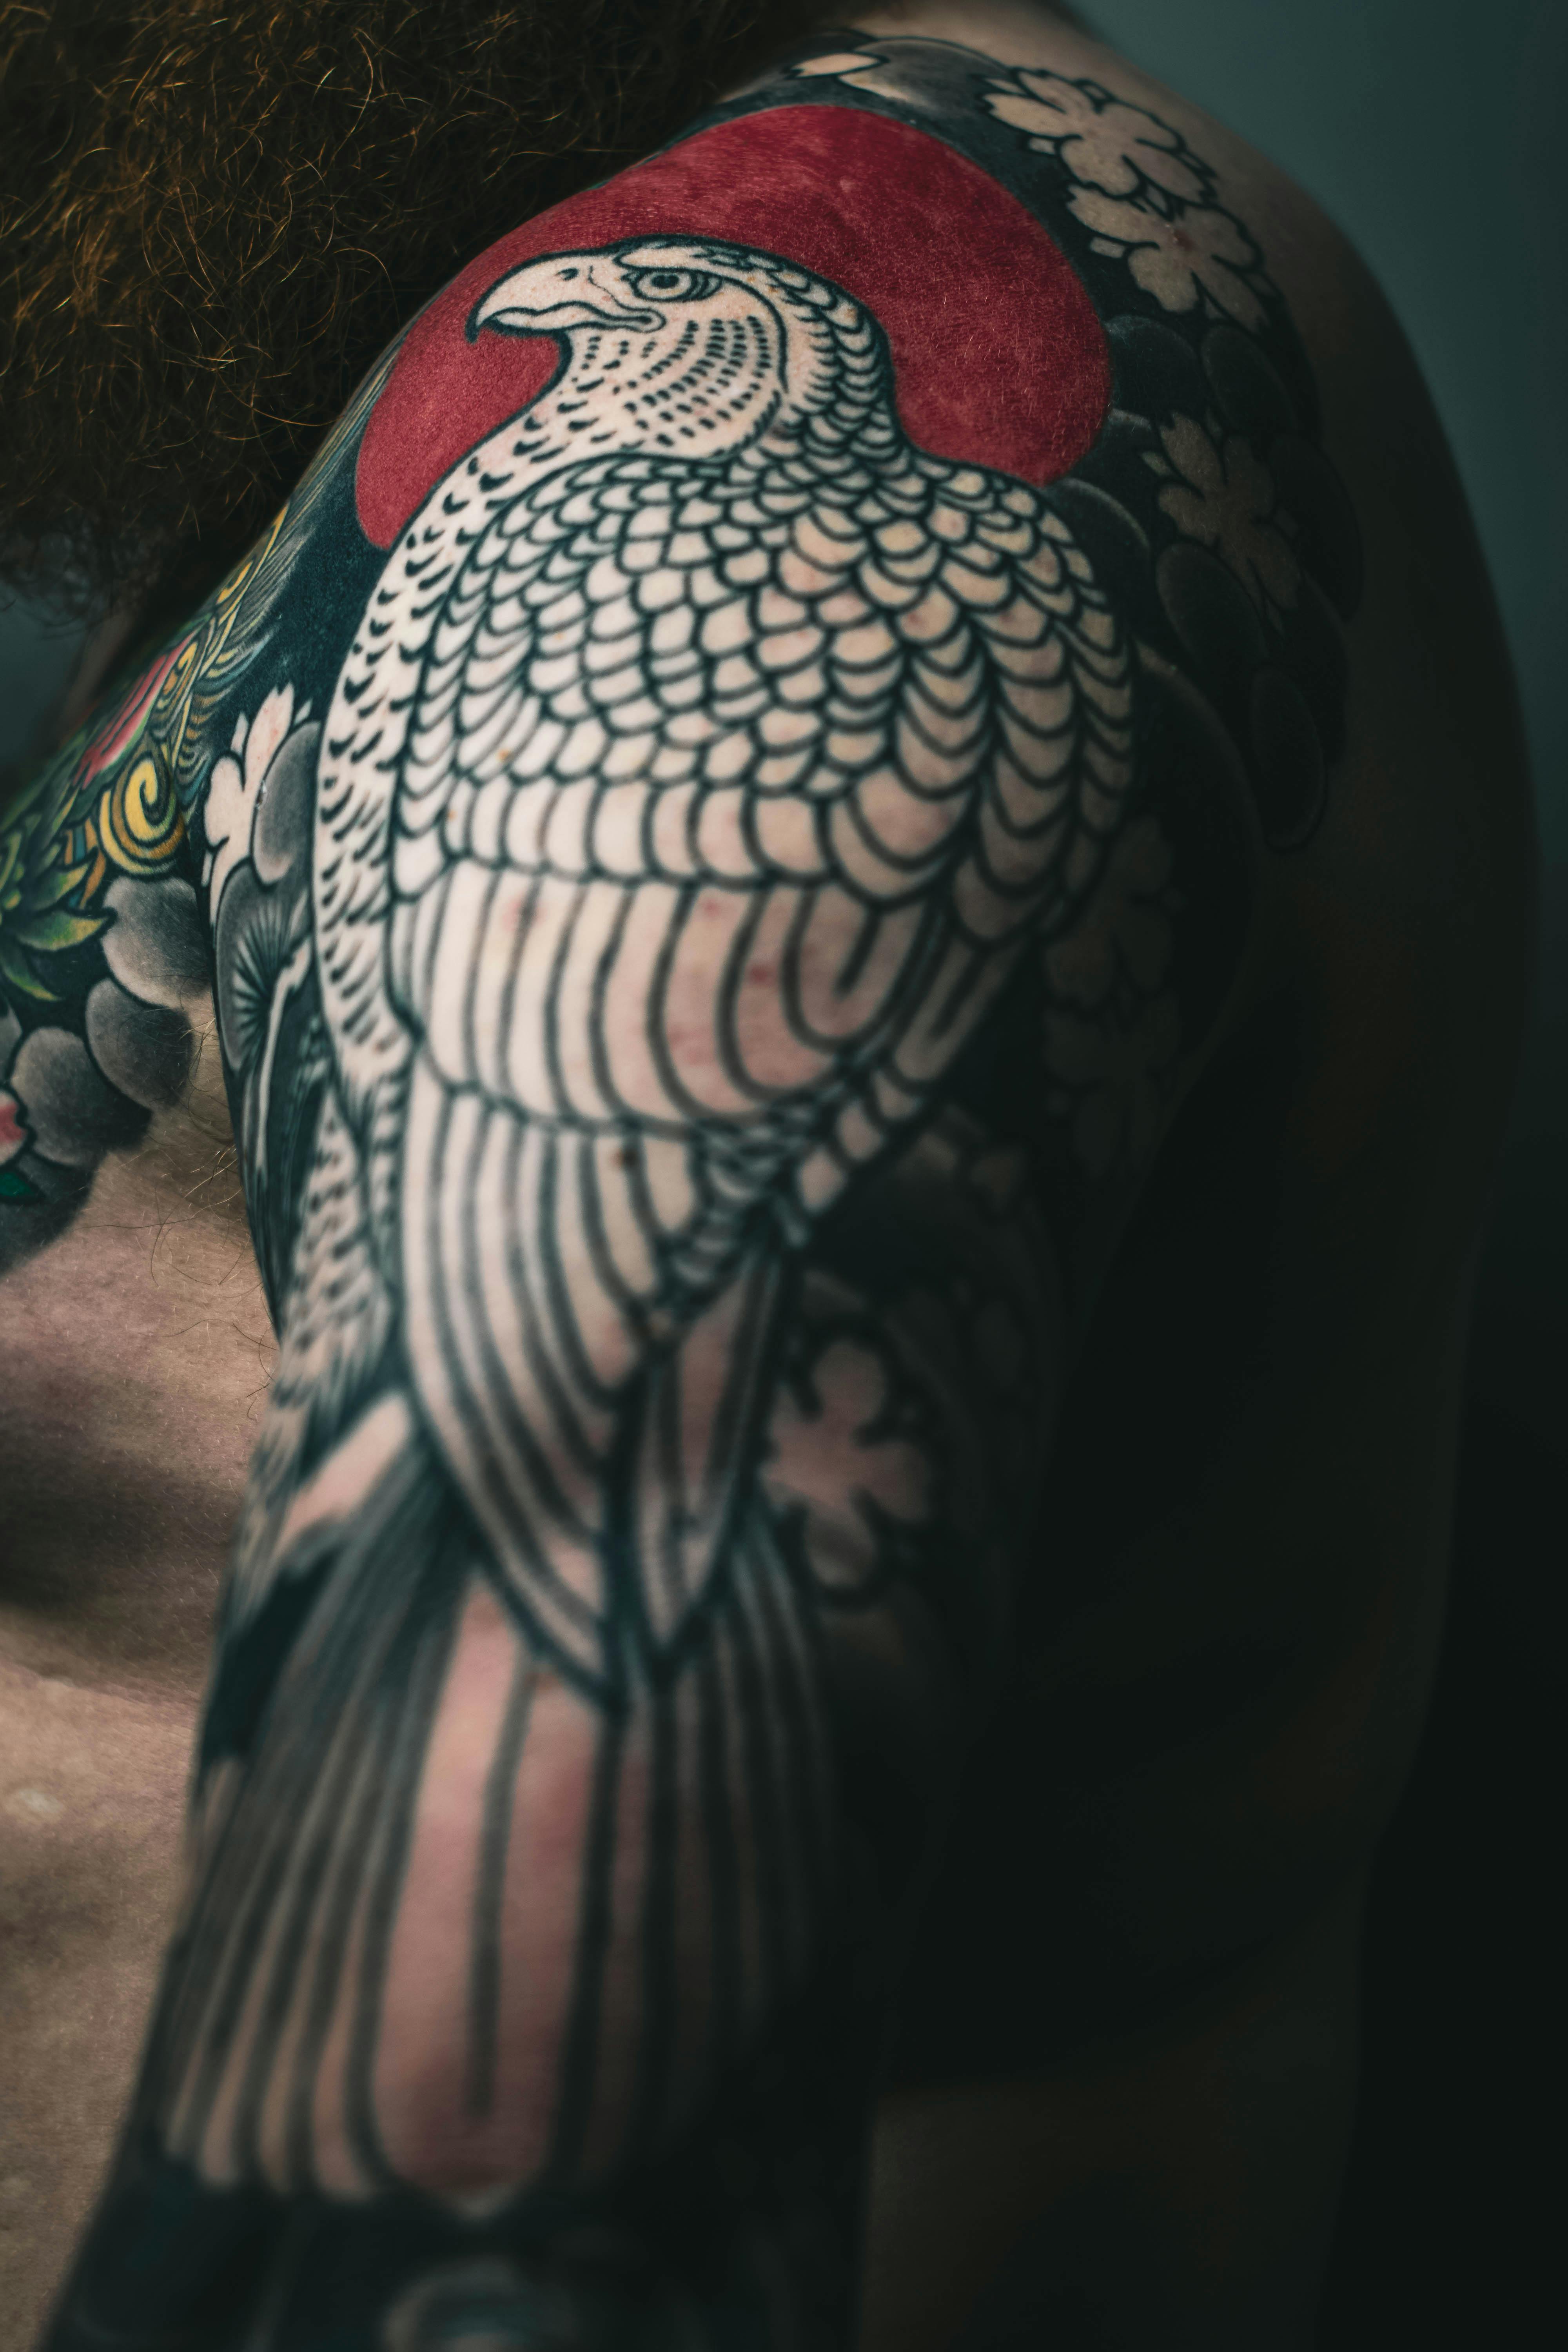 30 Adorable Parrot Tattoo Designs You will Love  Art and Design